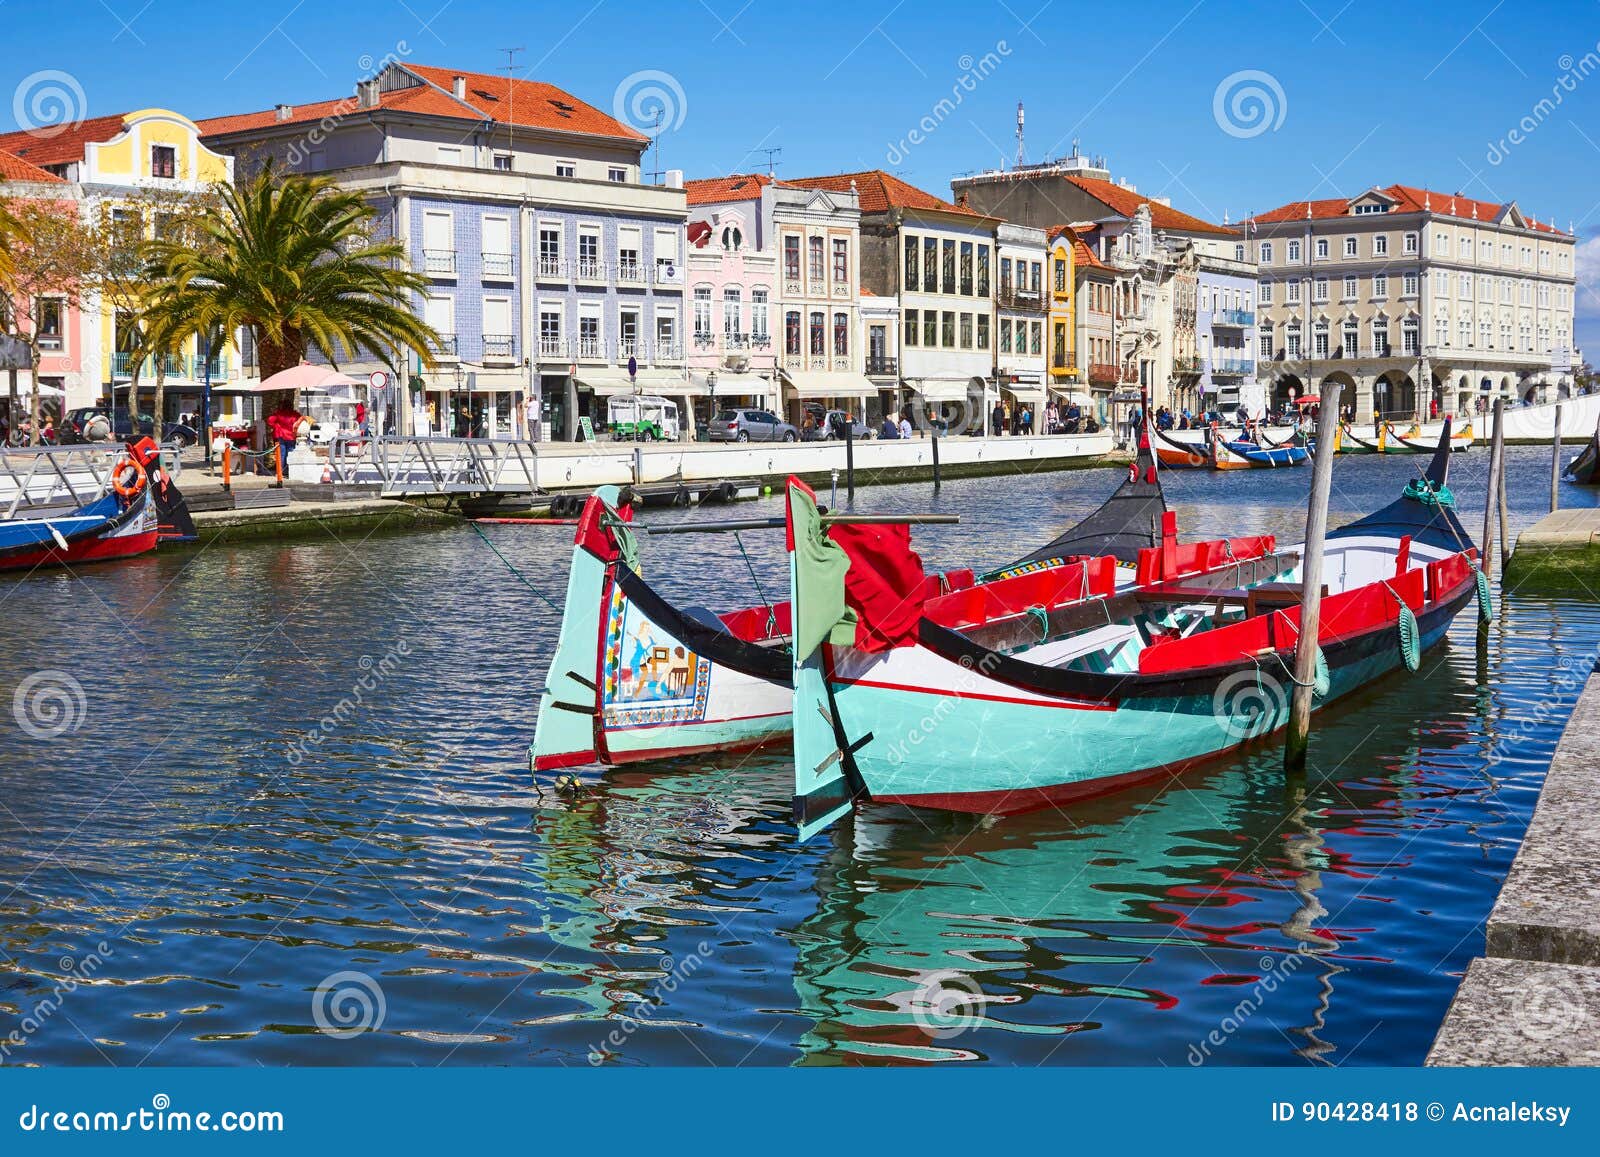 traditional boats on the canal in aveiro